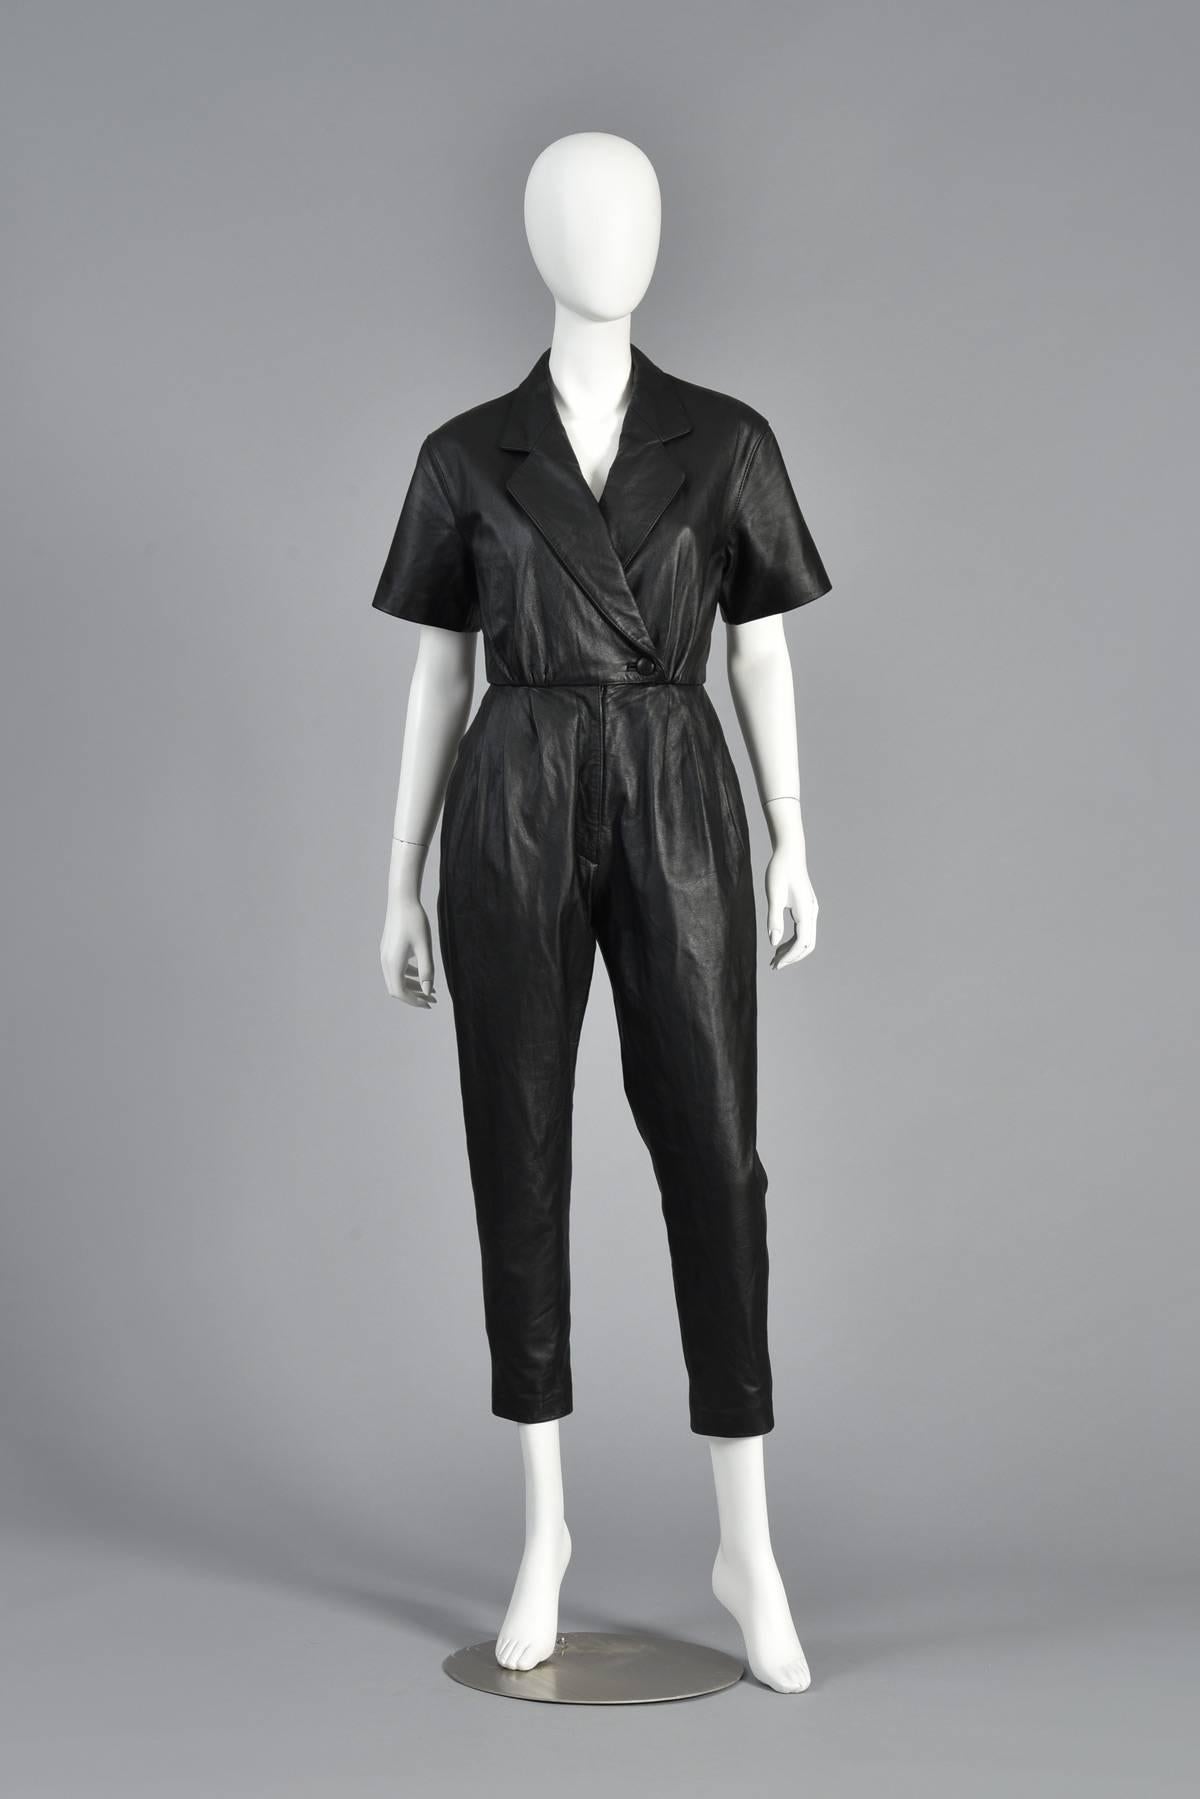 Super awesome 1980s black genuine leather vintage jumpsuit. If you’ve followed us for a while, you know I’ve never met a leather jumpsuit (or a spangle for that matter) that I didn’t like. So when I found this gem, so minimal and unlike any others